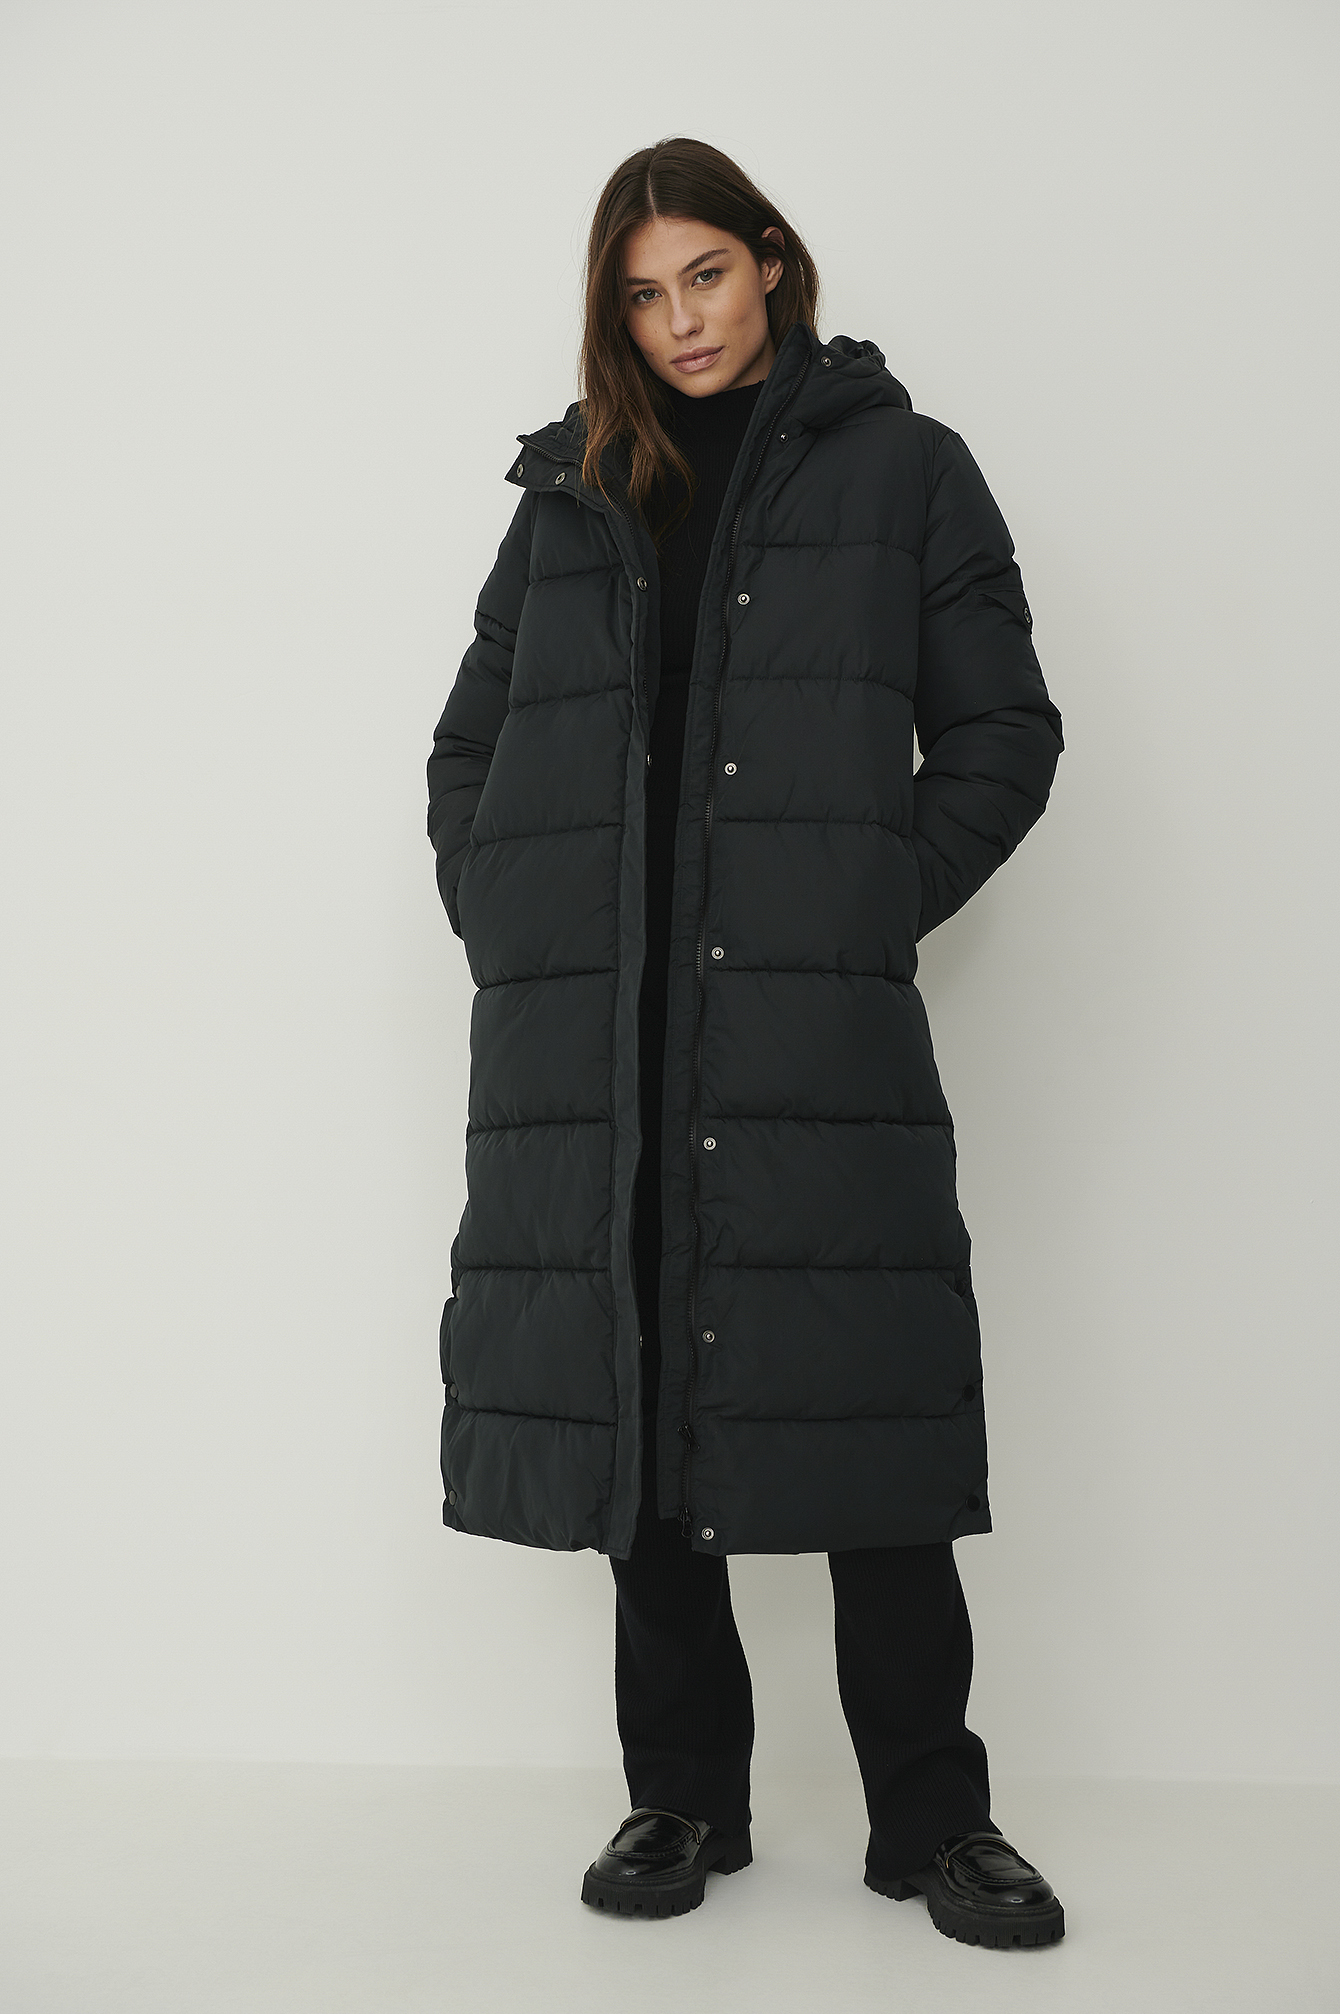 Long Padded Jacket Outfit.